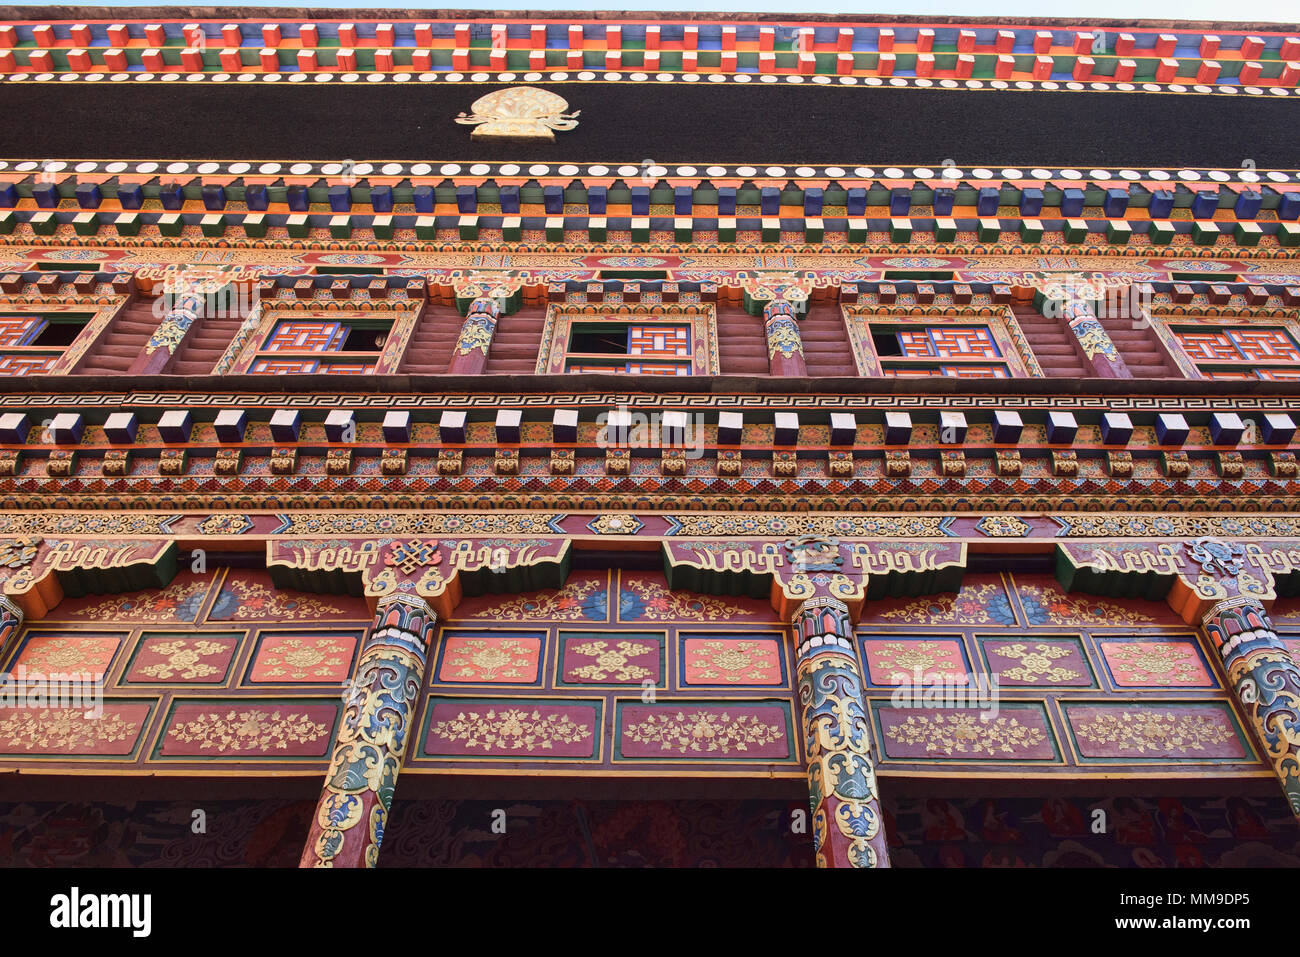 Architecture inside the Bakong Scripture Printing Press Monastery in Dege, Sichuan, China Stock Photo